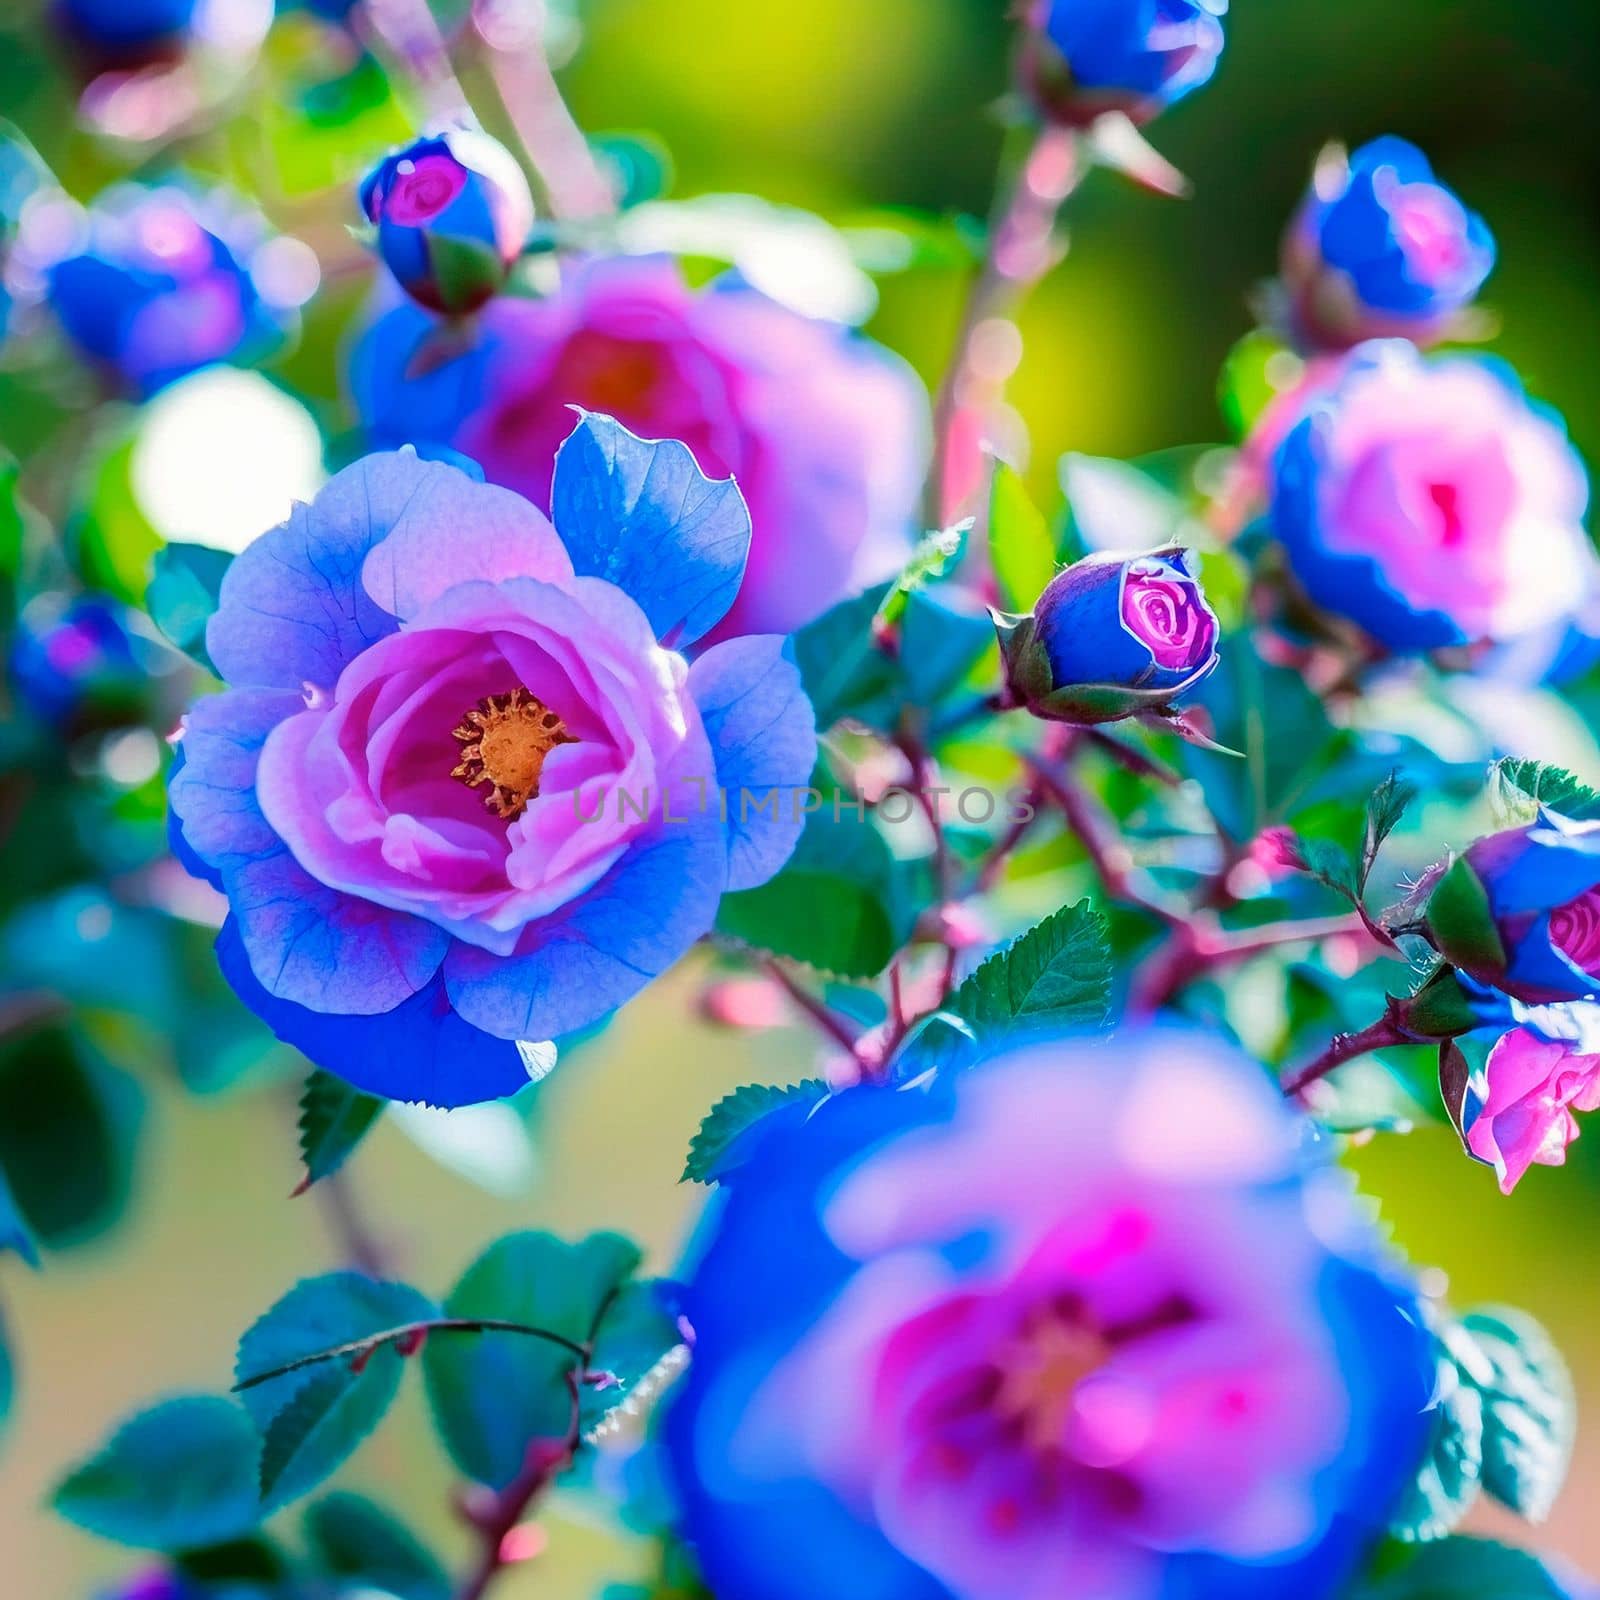 Wild rose with blue buds by NeuroSky